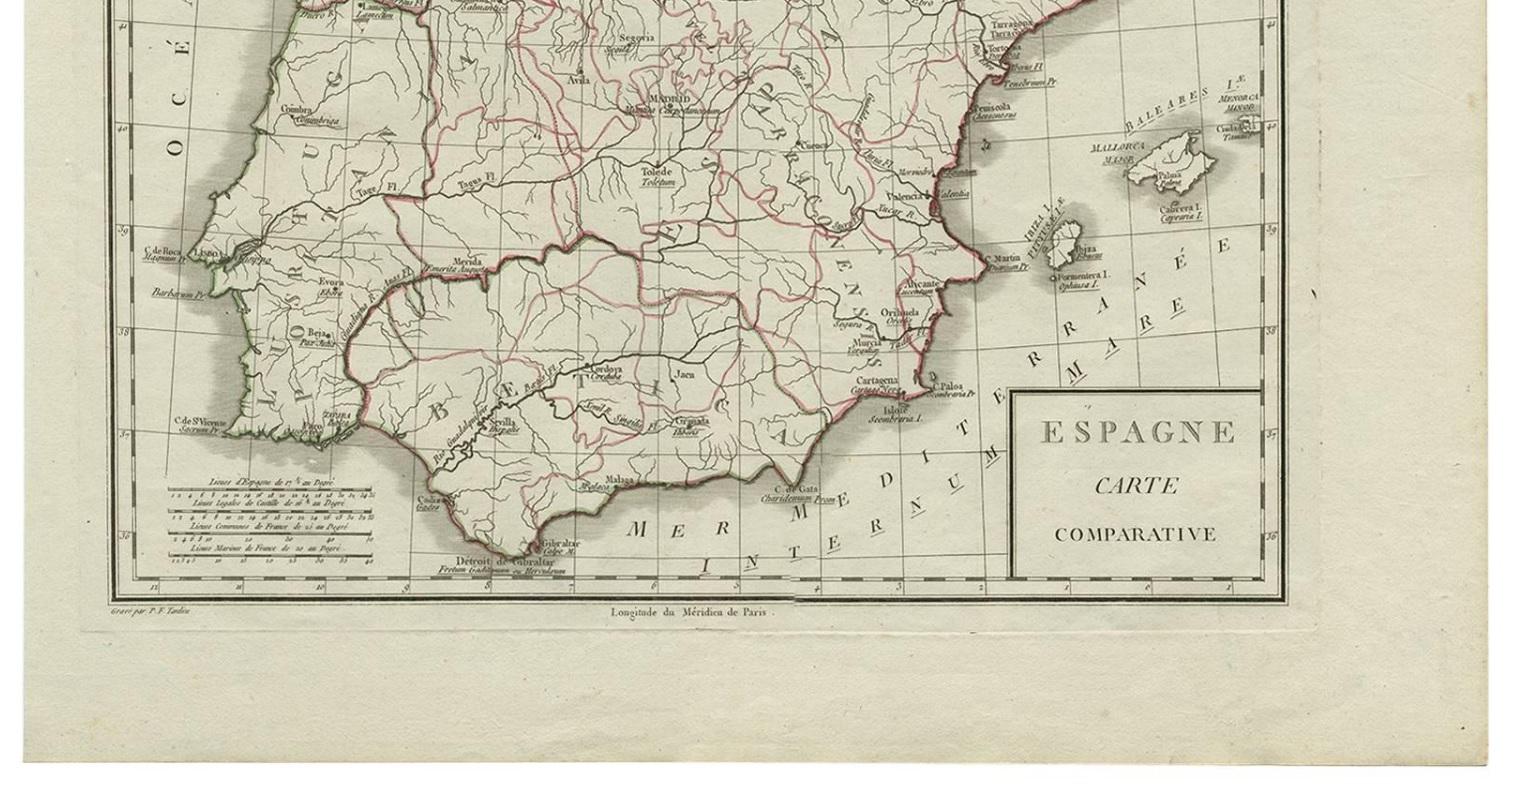 Antique map titled 'Espagne carte comparative', showing river systems, the modern states of Spain and Portugal and the Roman provinces of Lusitania, Beatica & Hispania Tarraconensis. This map originates from 'Atlas universel de geographie physique